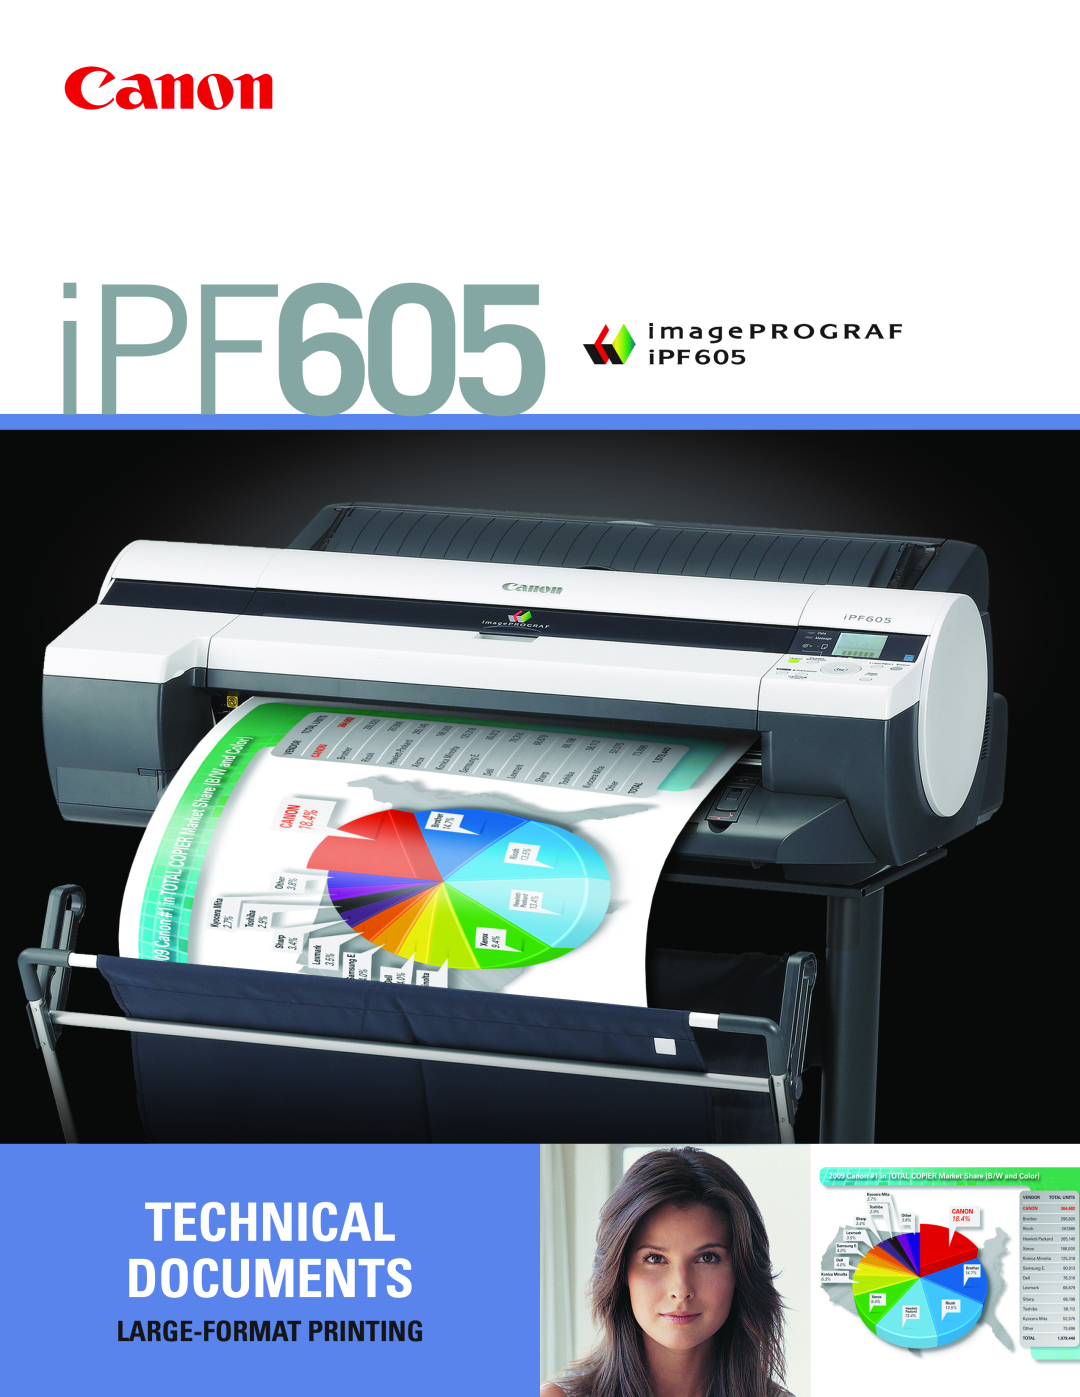 Canon IPF605 manual iPF605, Technical Documents, Large-Format Printing 